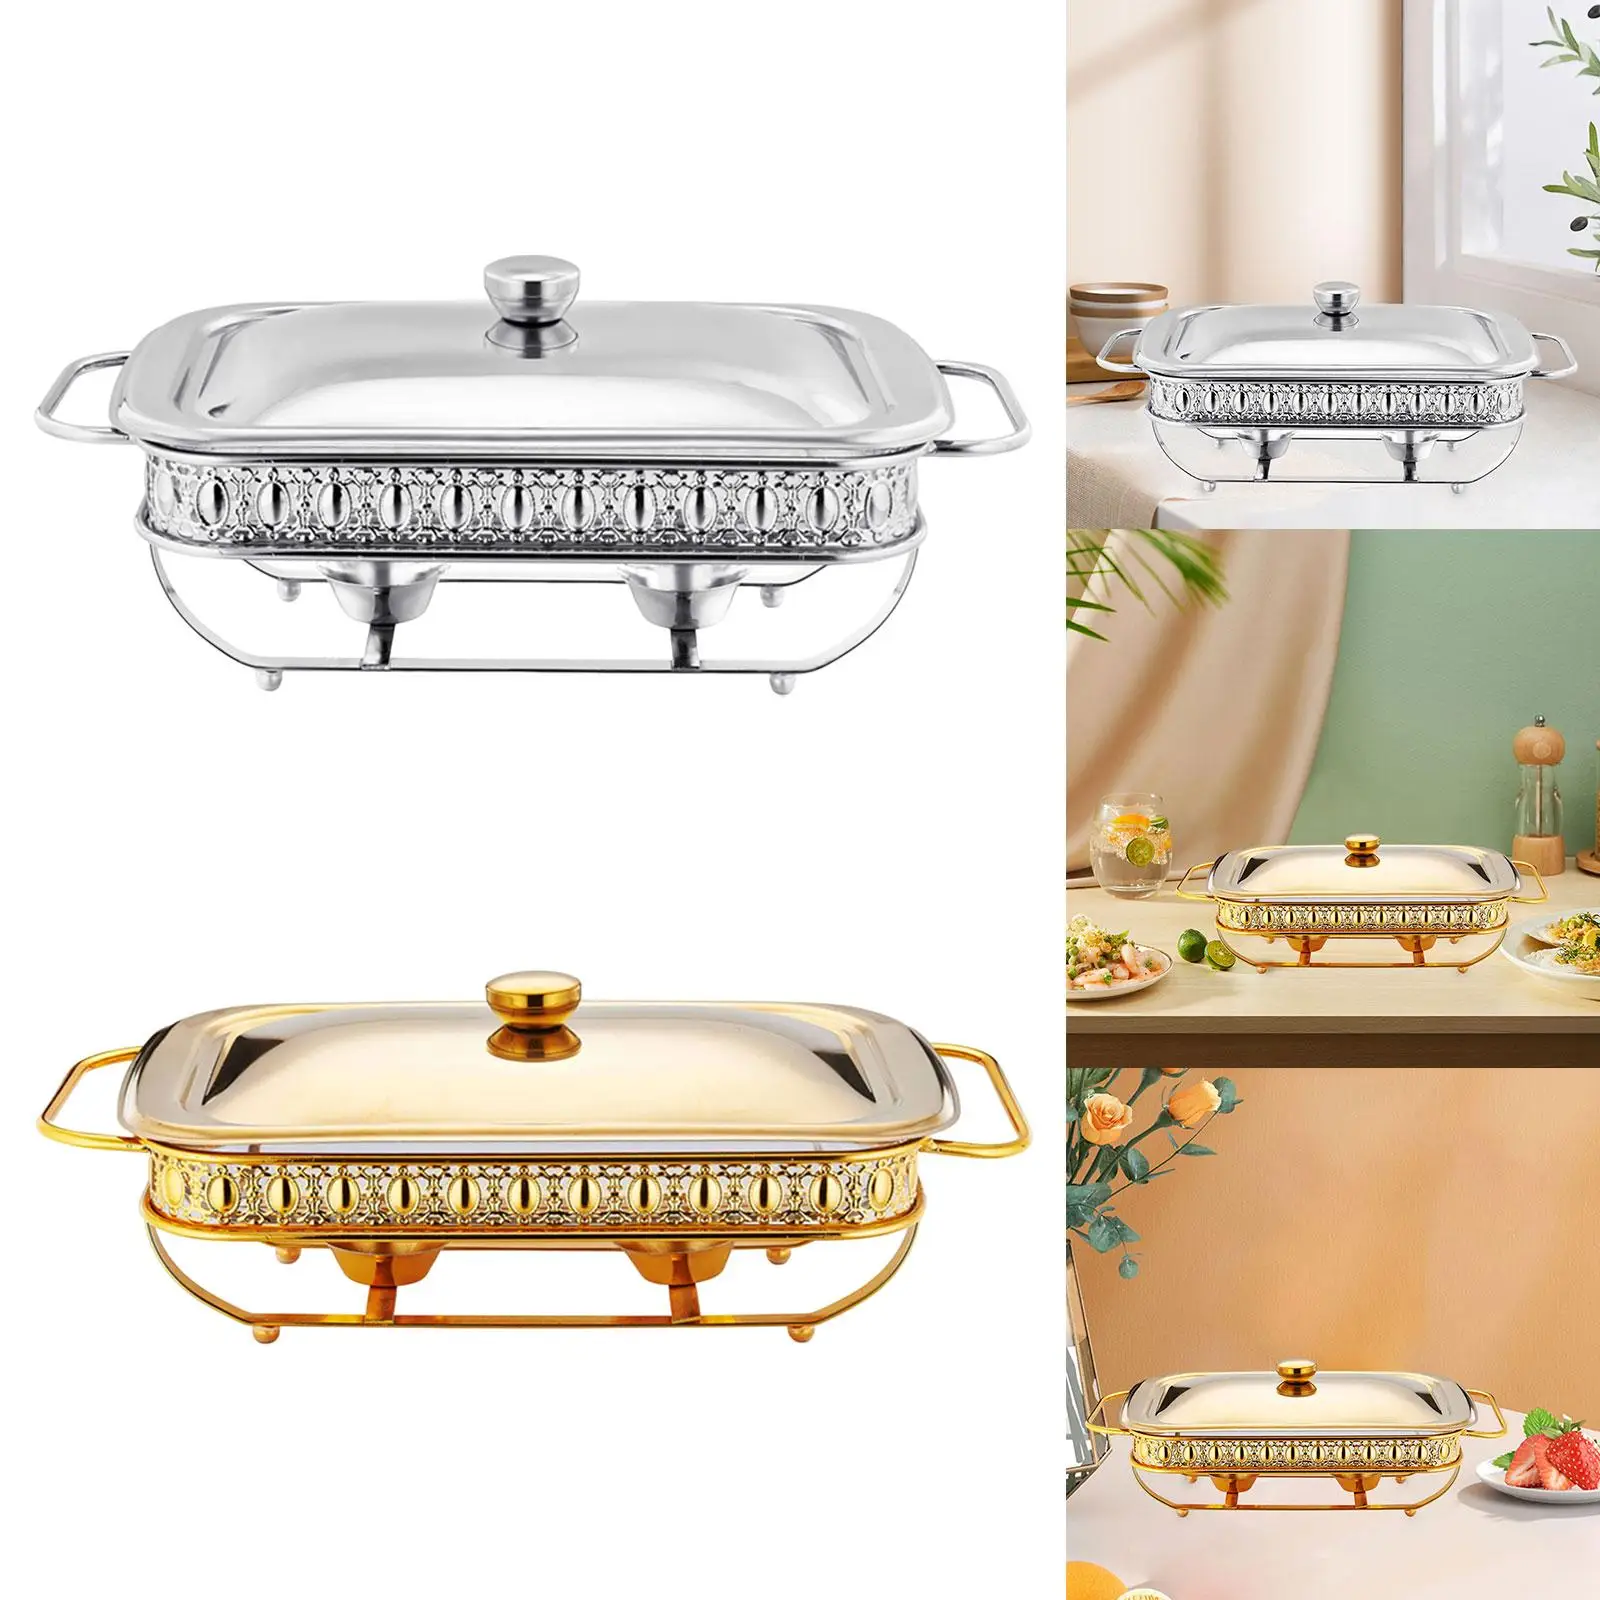 Stainless Steel Chafing Dish Buffet Set,Rectangular Catering Warmer Set with Trays for Banquet